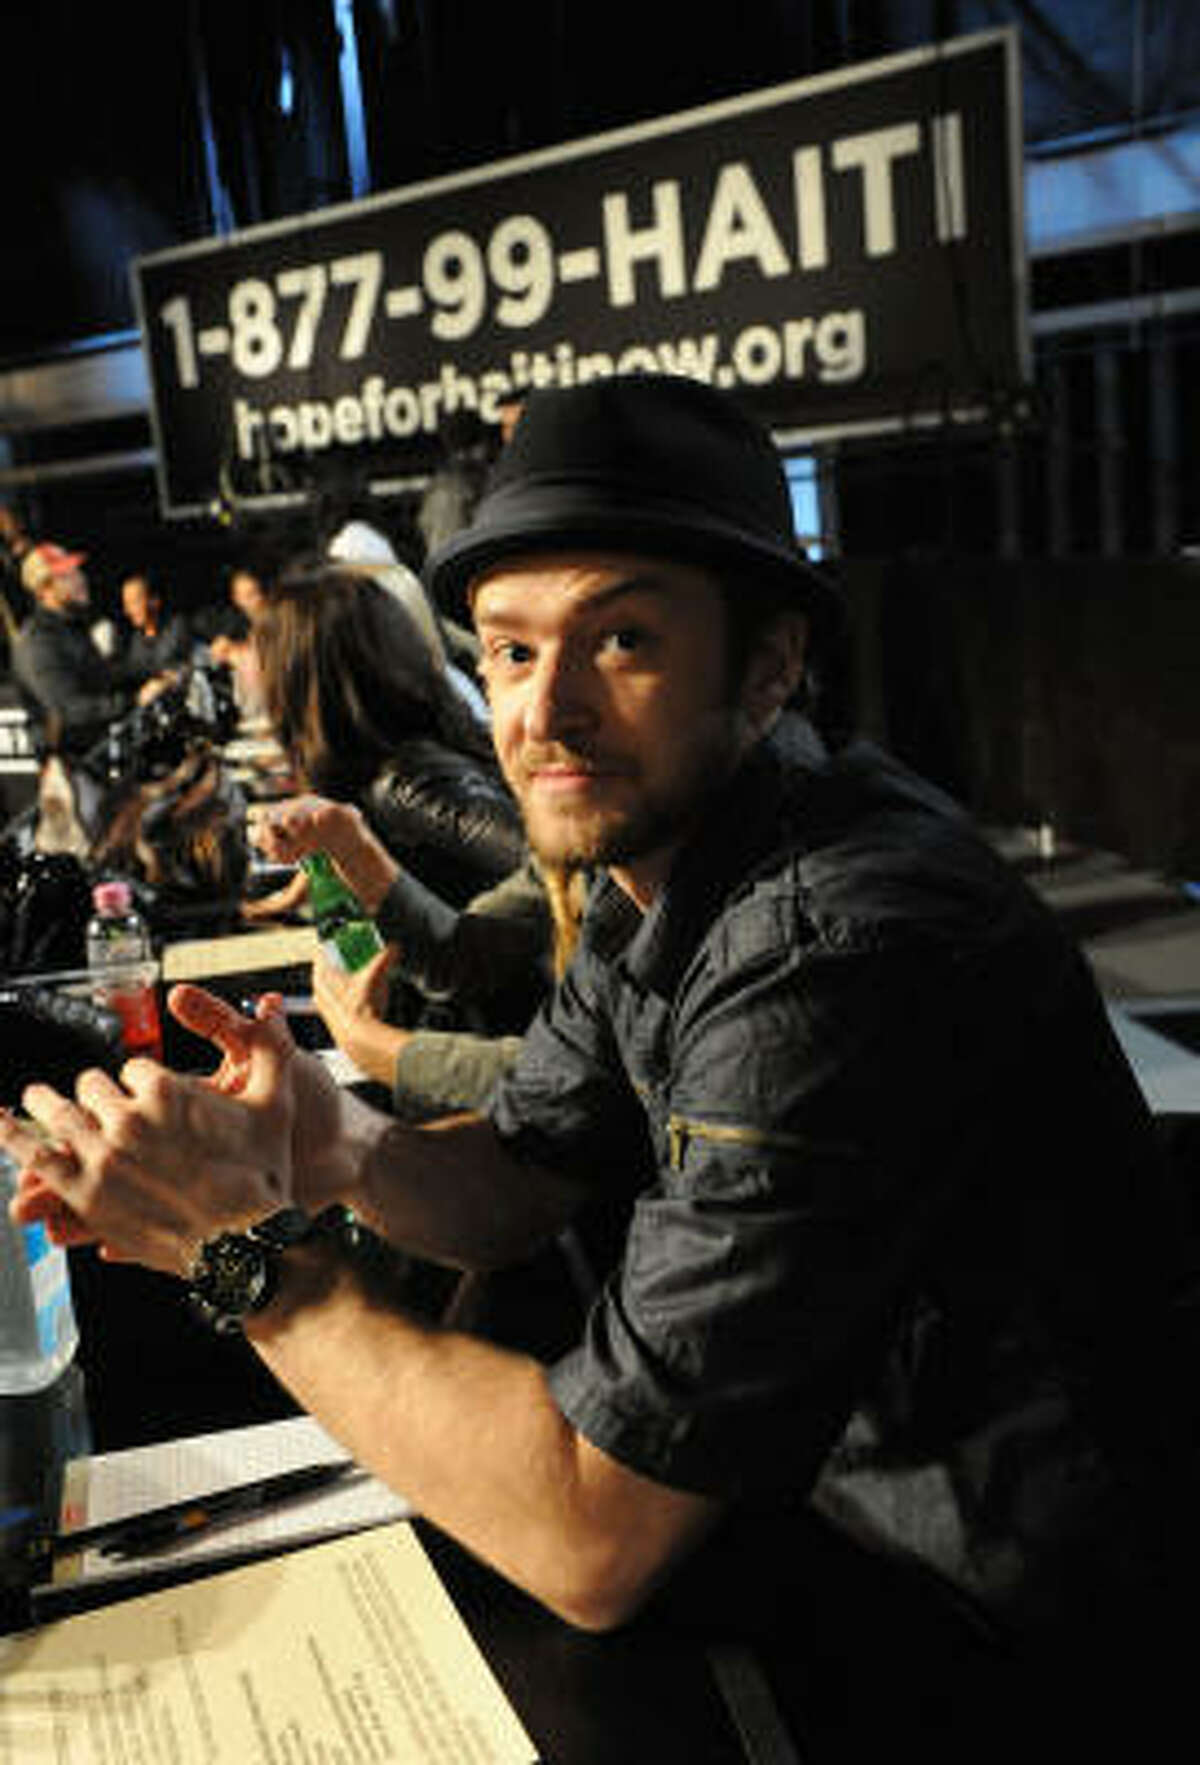 LOS ANGELES, CA - JANUARY 22: In this handout photo provided by MTV, singer Justin Timberlake waits to answer phones during the Hope For Haiti Now: A Global Benefit For Earthquake Relief telethon on January 22, 2010 in Los Angeles, California. (Photo by Jeff Kravitz/MTV Hope for Haiti Now via Getty Images)